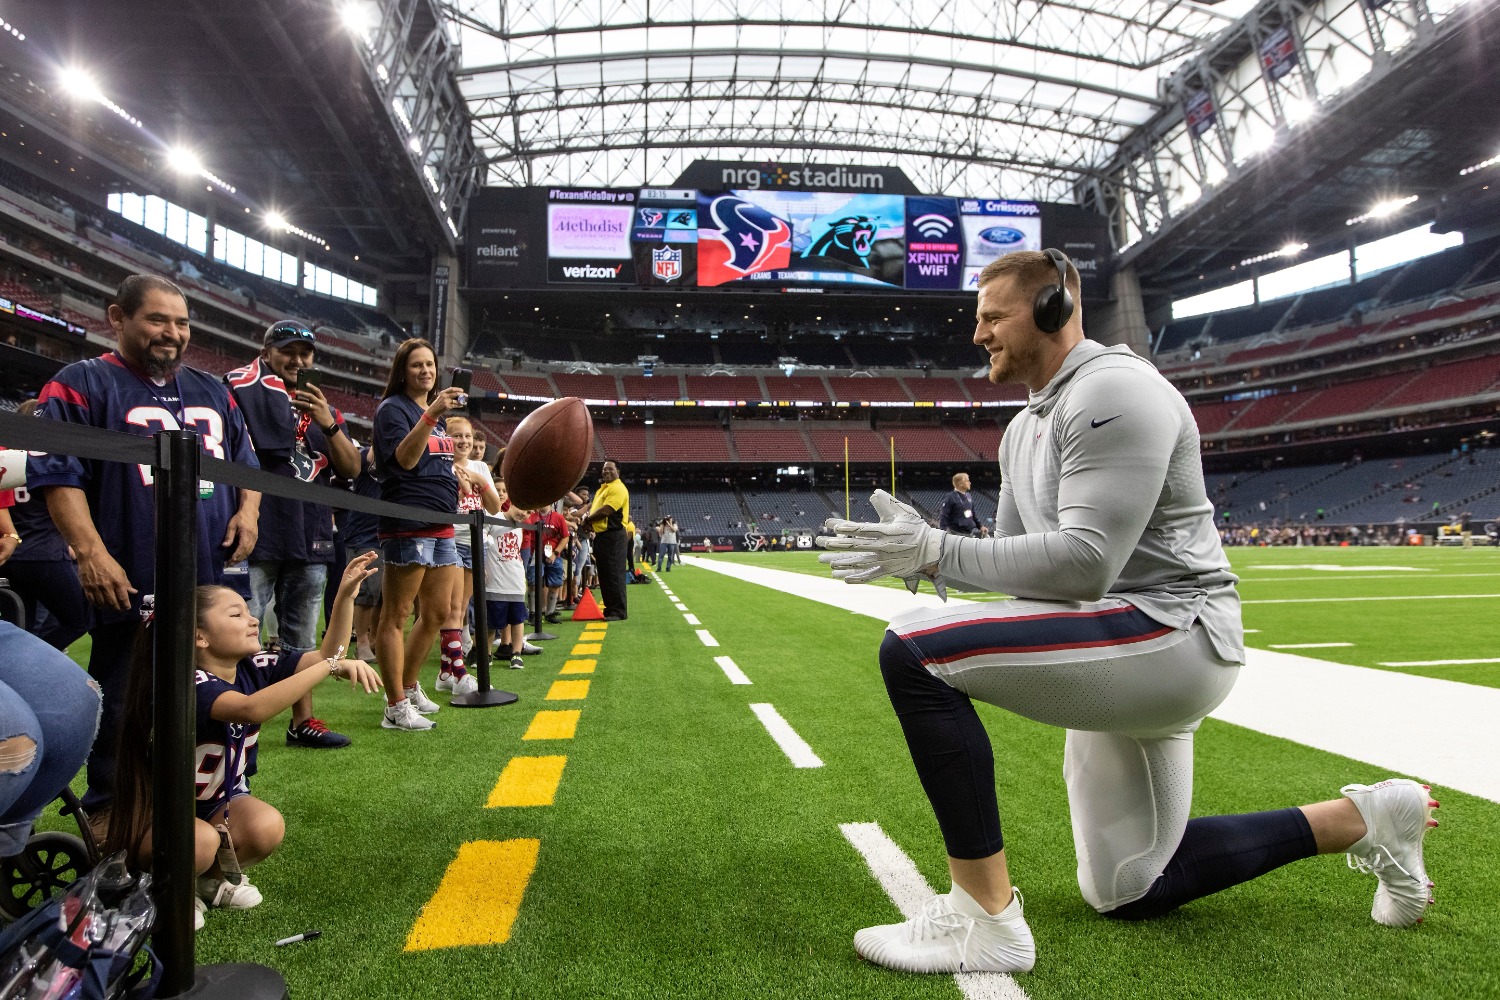 J.J. Watt just admitted his true feelings about Texans fans, who have had to endure years of frustration with Bill O'Brien at the helm. Will a change at head coach help Houston turn its season around?